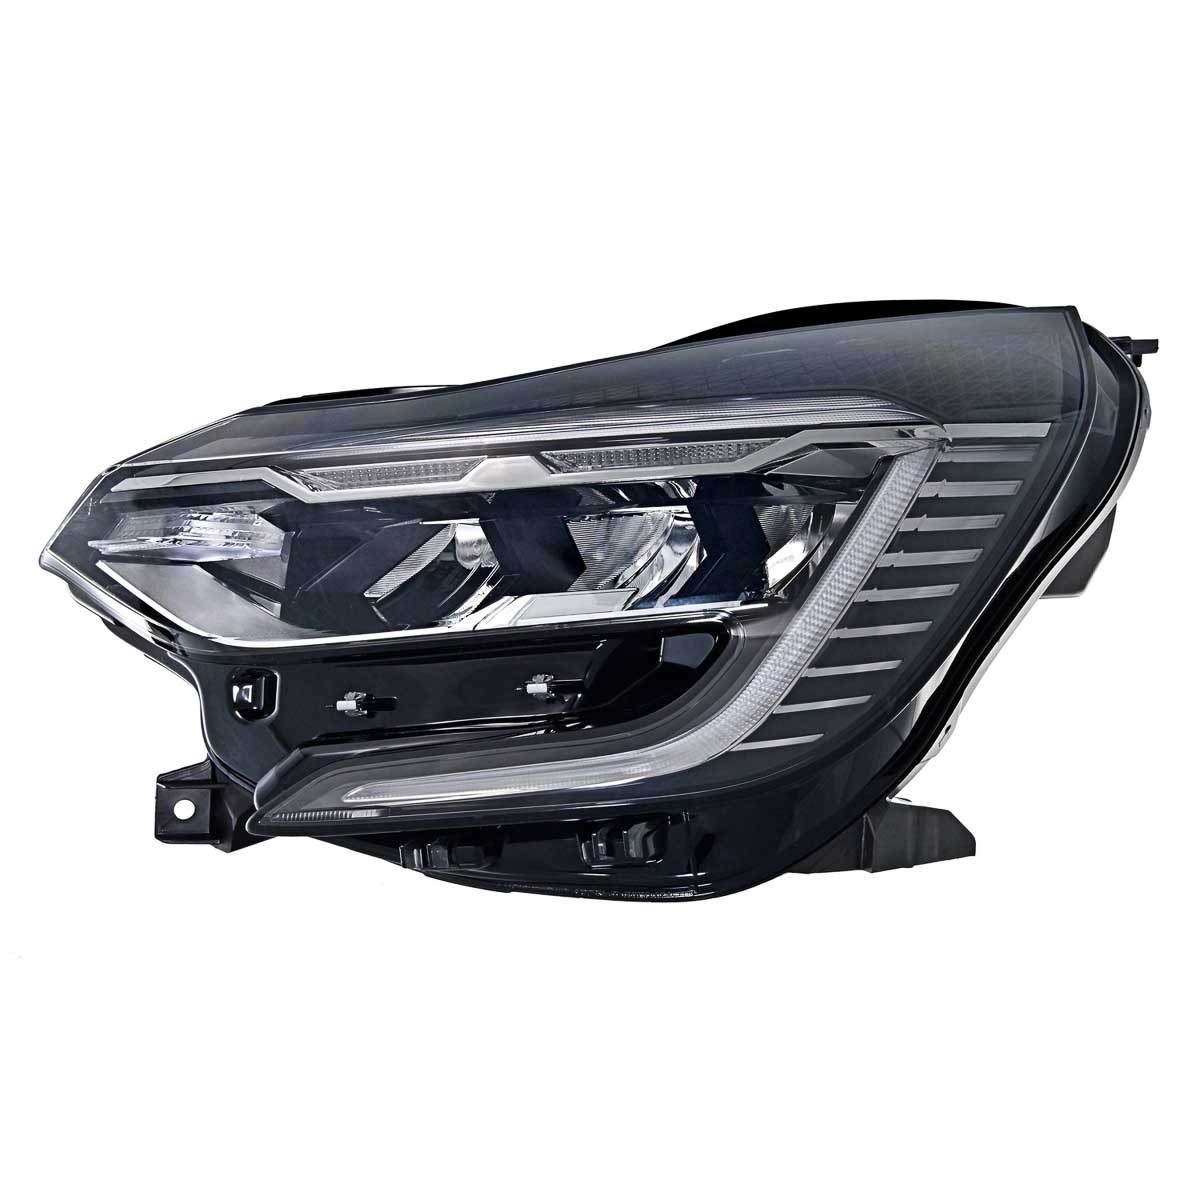 HELLA 1EX 013 930-611 Headlight Left, LED, LED, 12V, with low beam (LED), with high beam (LED), with indicator (LED), with position light (LED), with daytime running light (LED), for right-hand traffic, without control unit